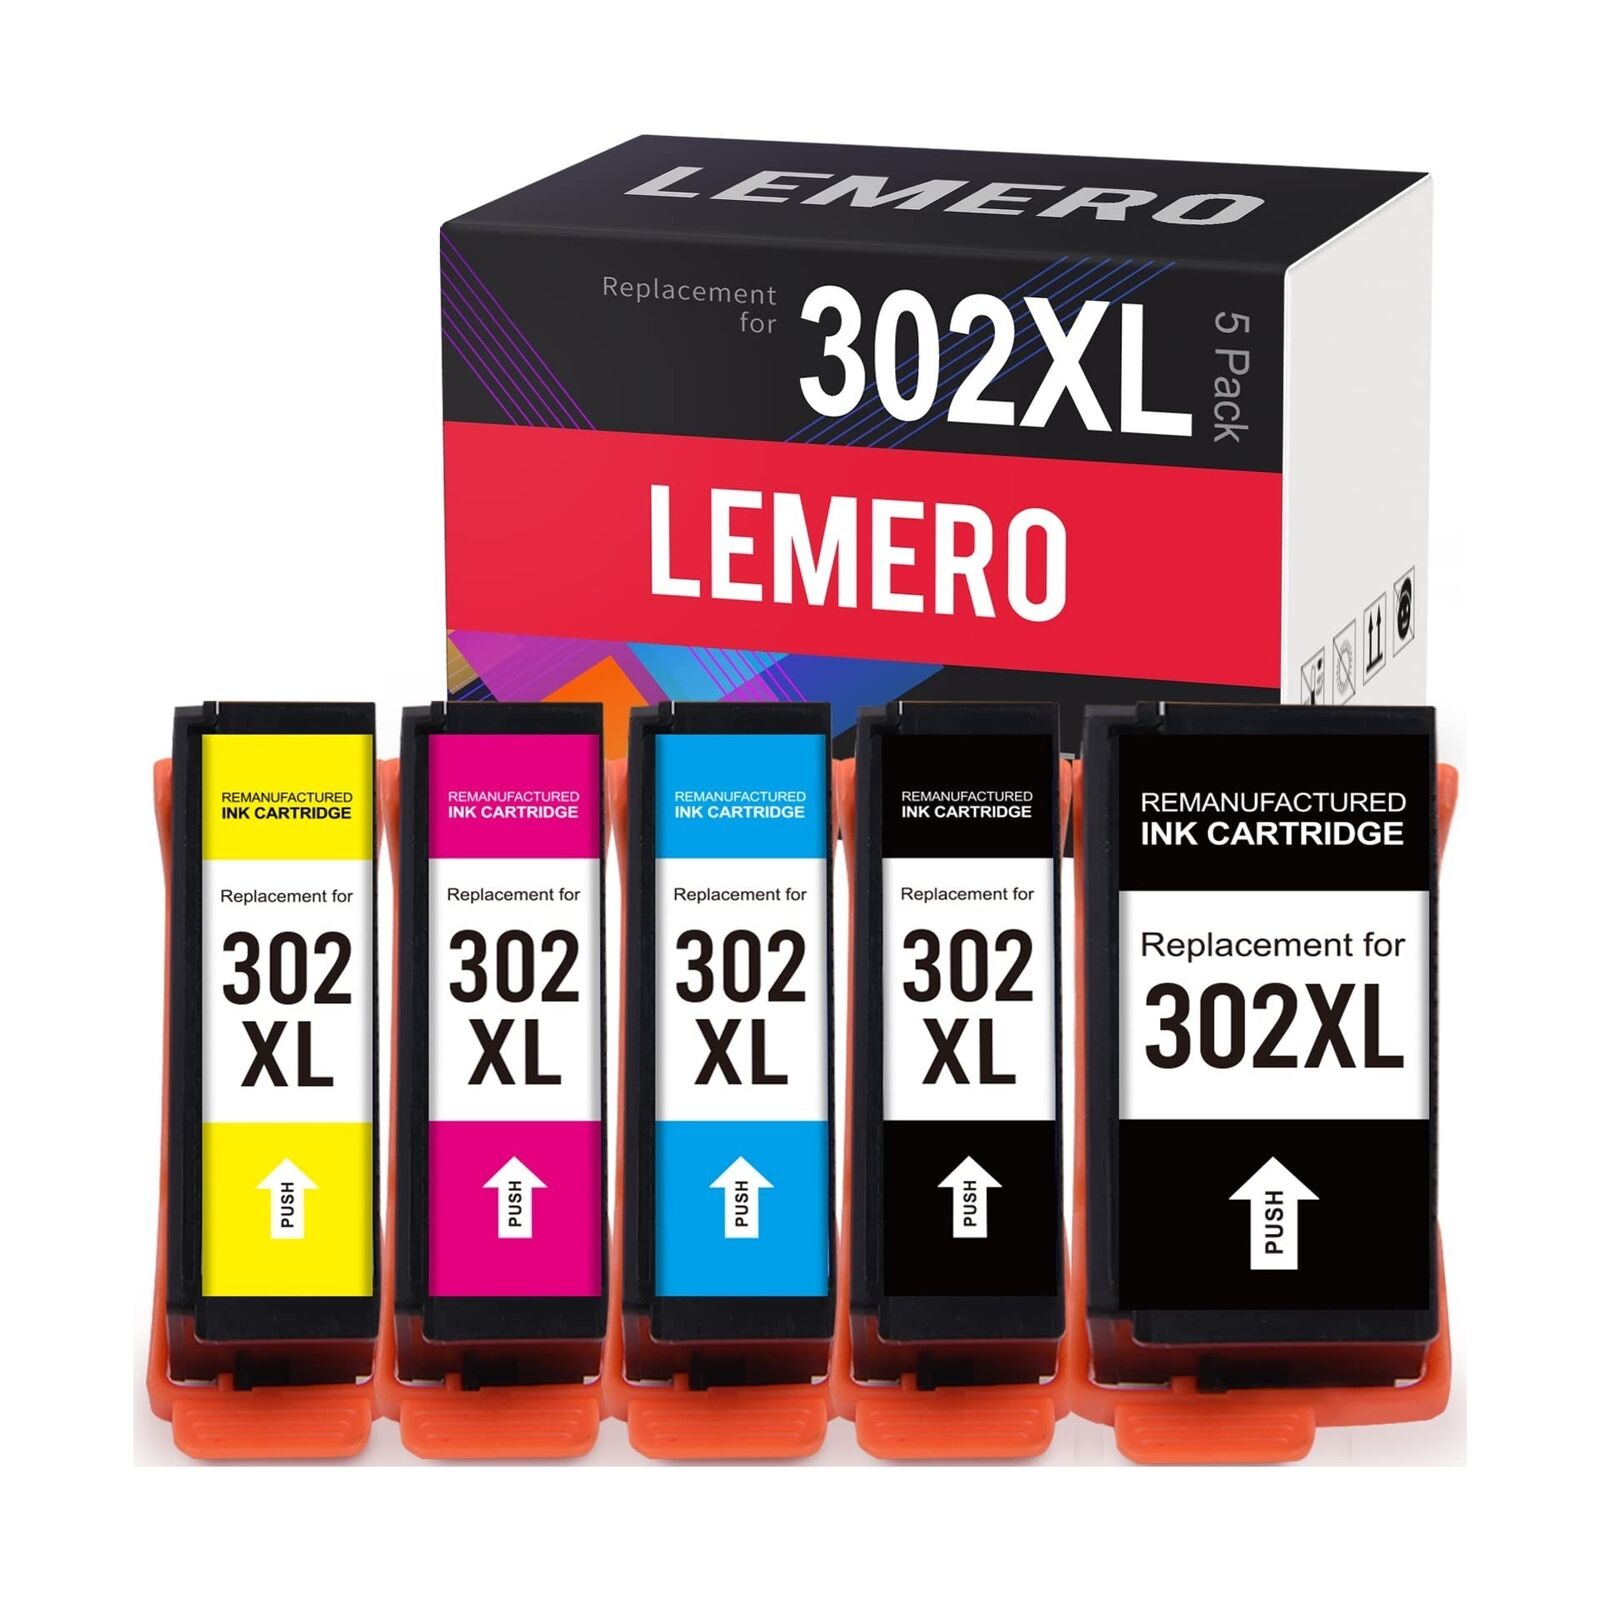 LEMERO Remanufactured Ink Cartridge Replacement for Epson 302 XL 302XL T302XL...